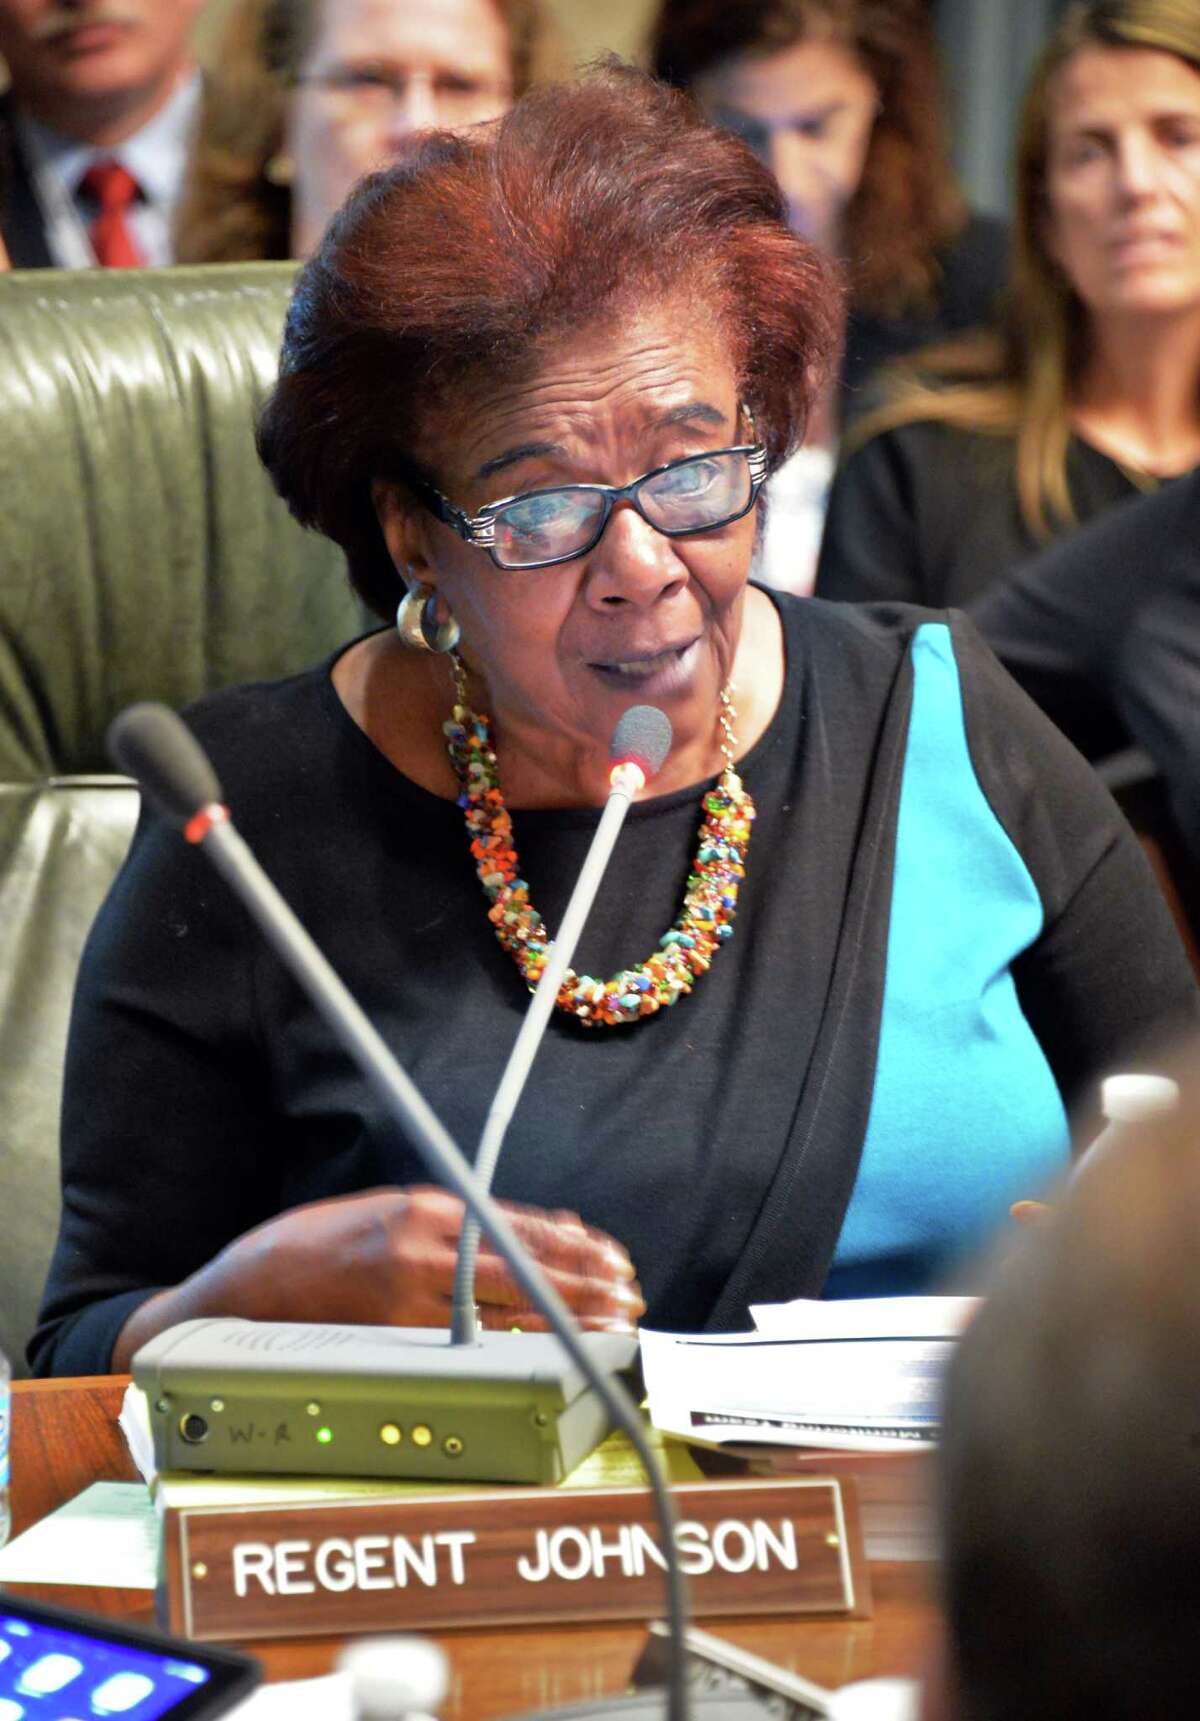 Regent Judith Johnson speaks during a meeting of the NY State Board of Regents at the State Education Building Wednesday Sept. 16, 2015 in Albany, NY. (John Carl D'Annibale / Times Union)